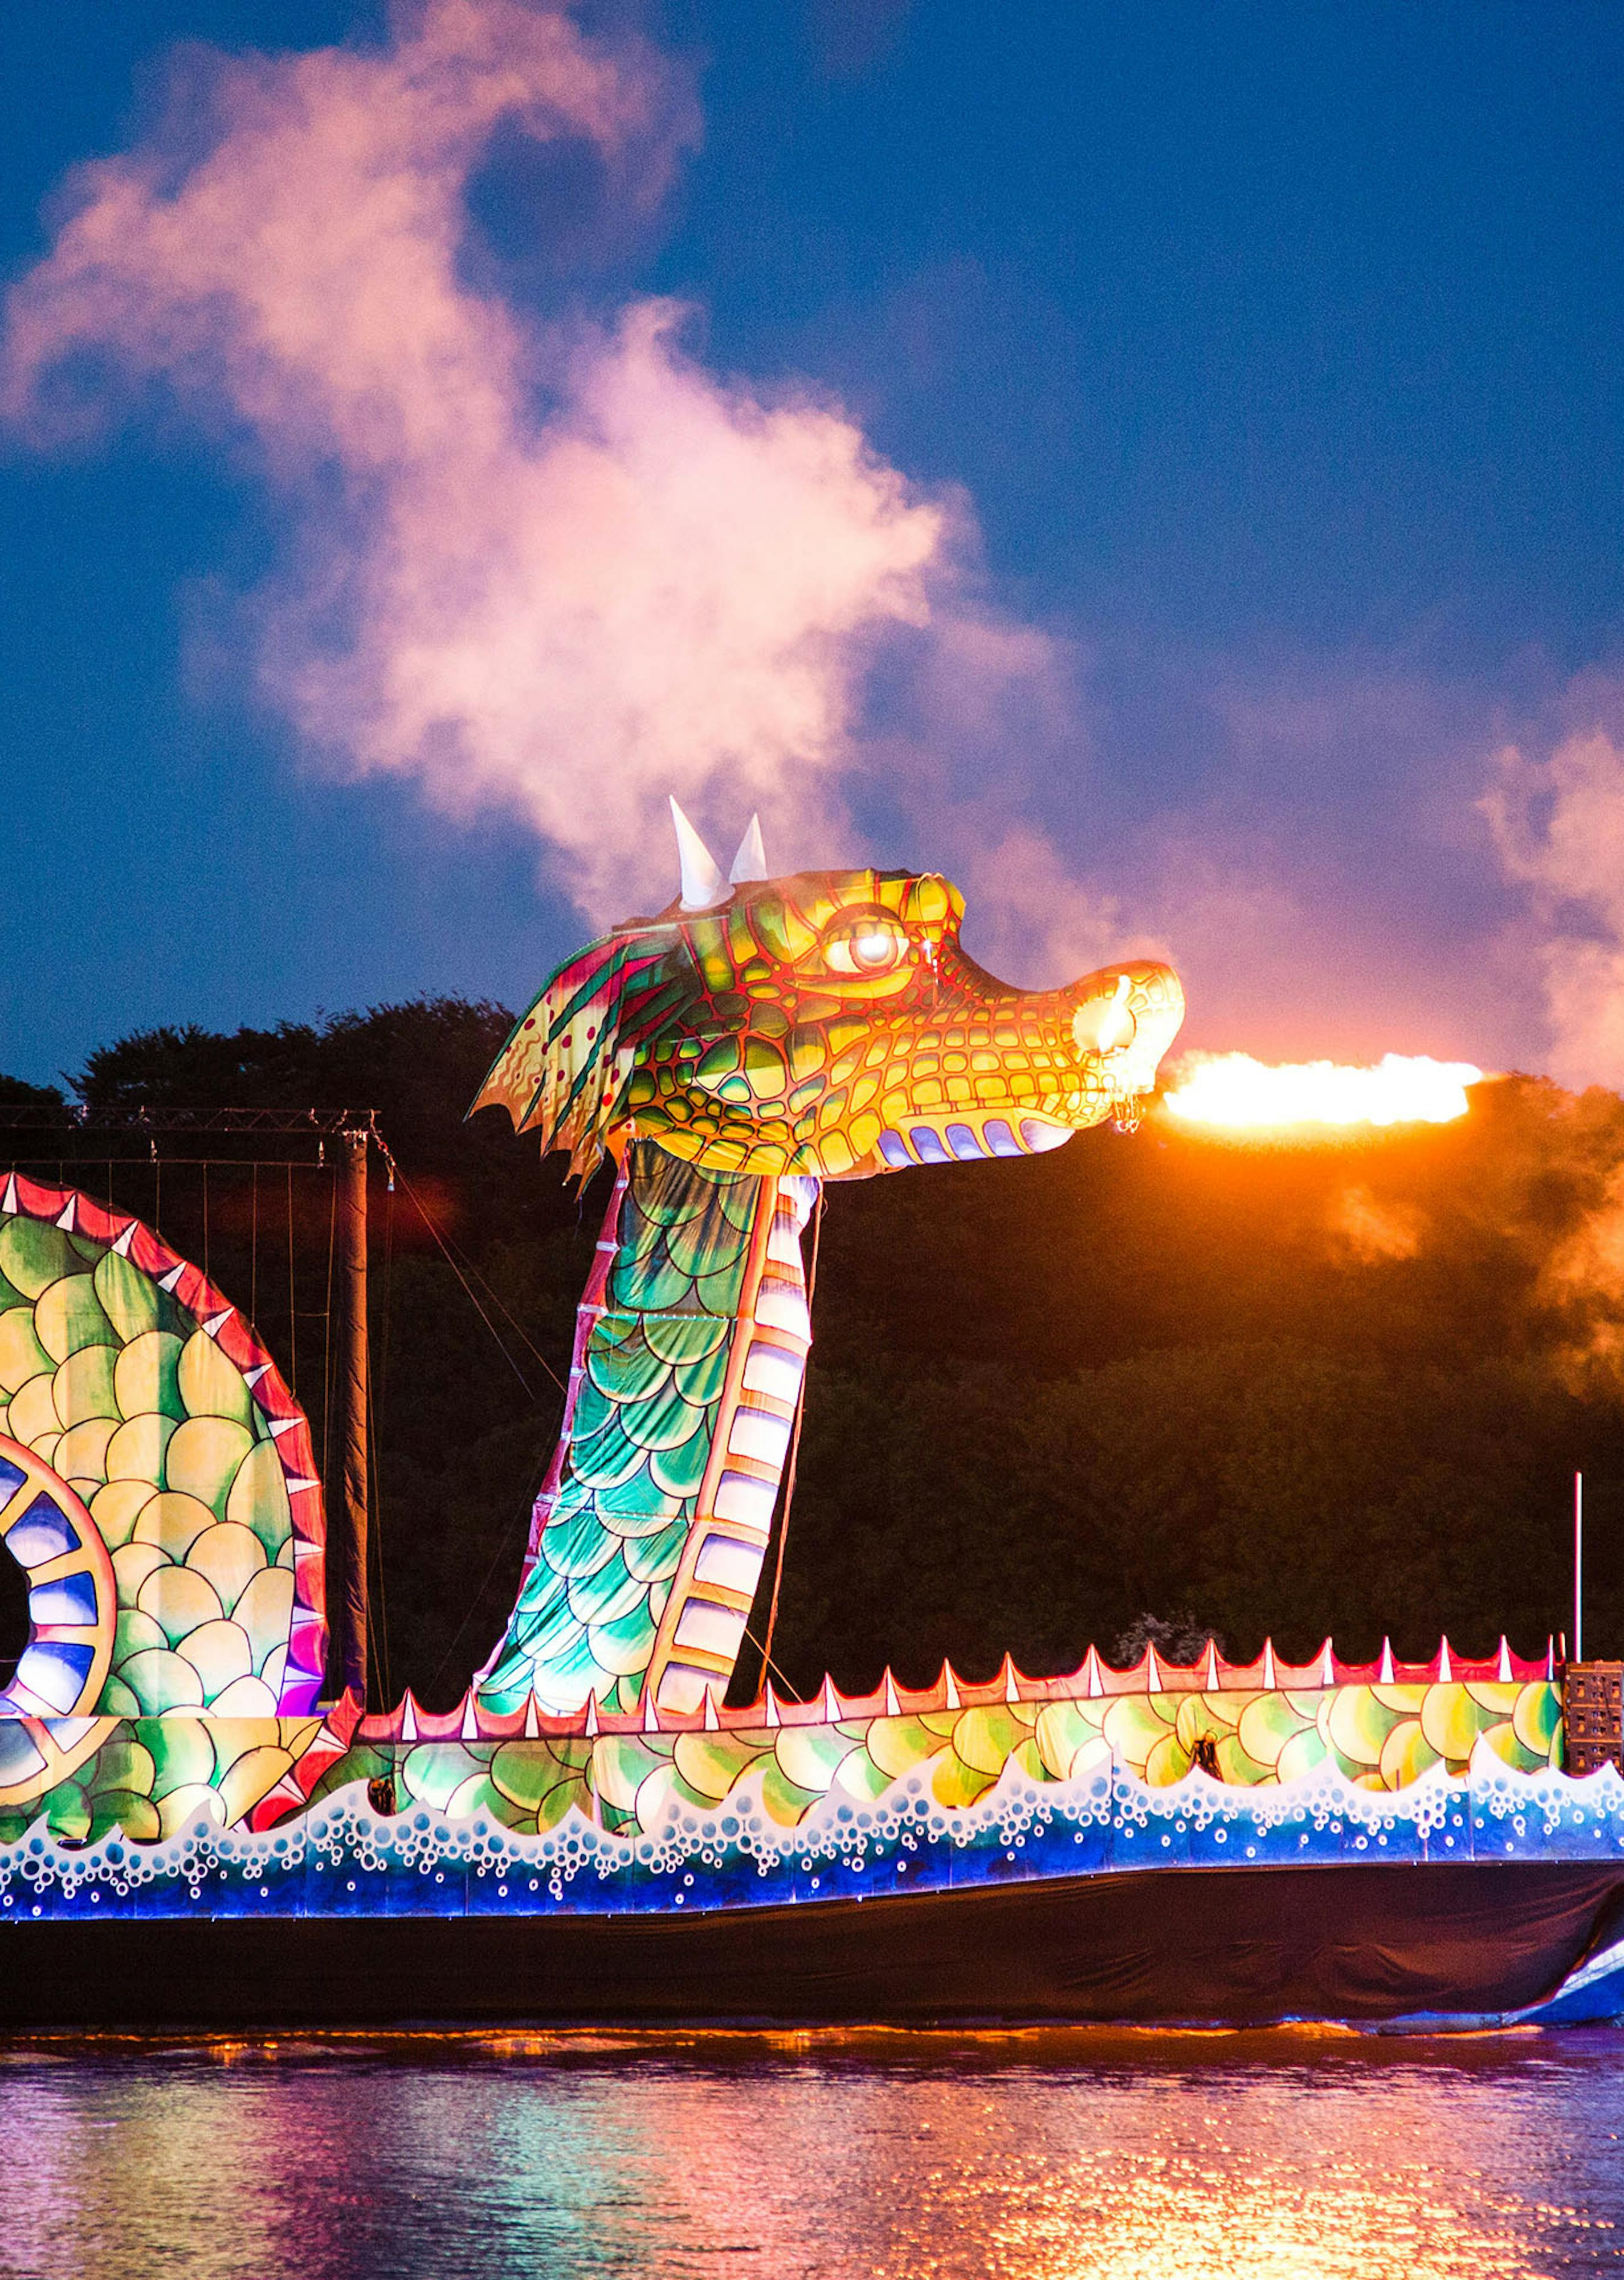 A large green dragon atop of boat breathing fire 